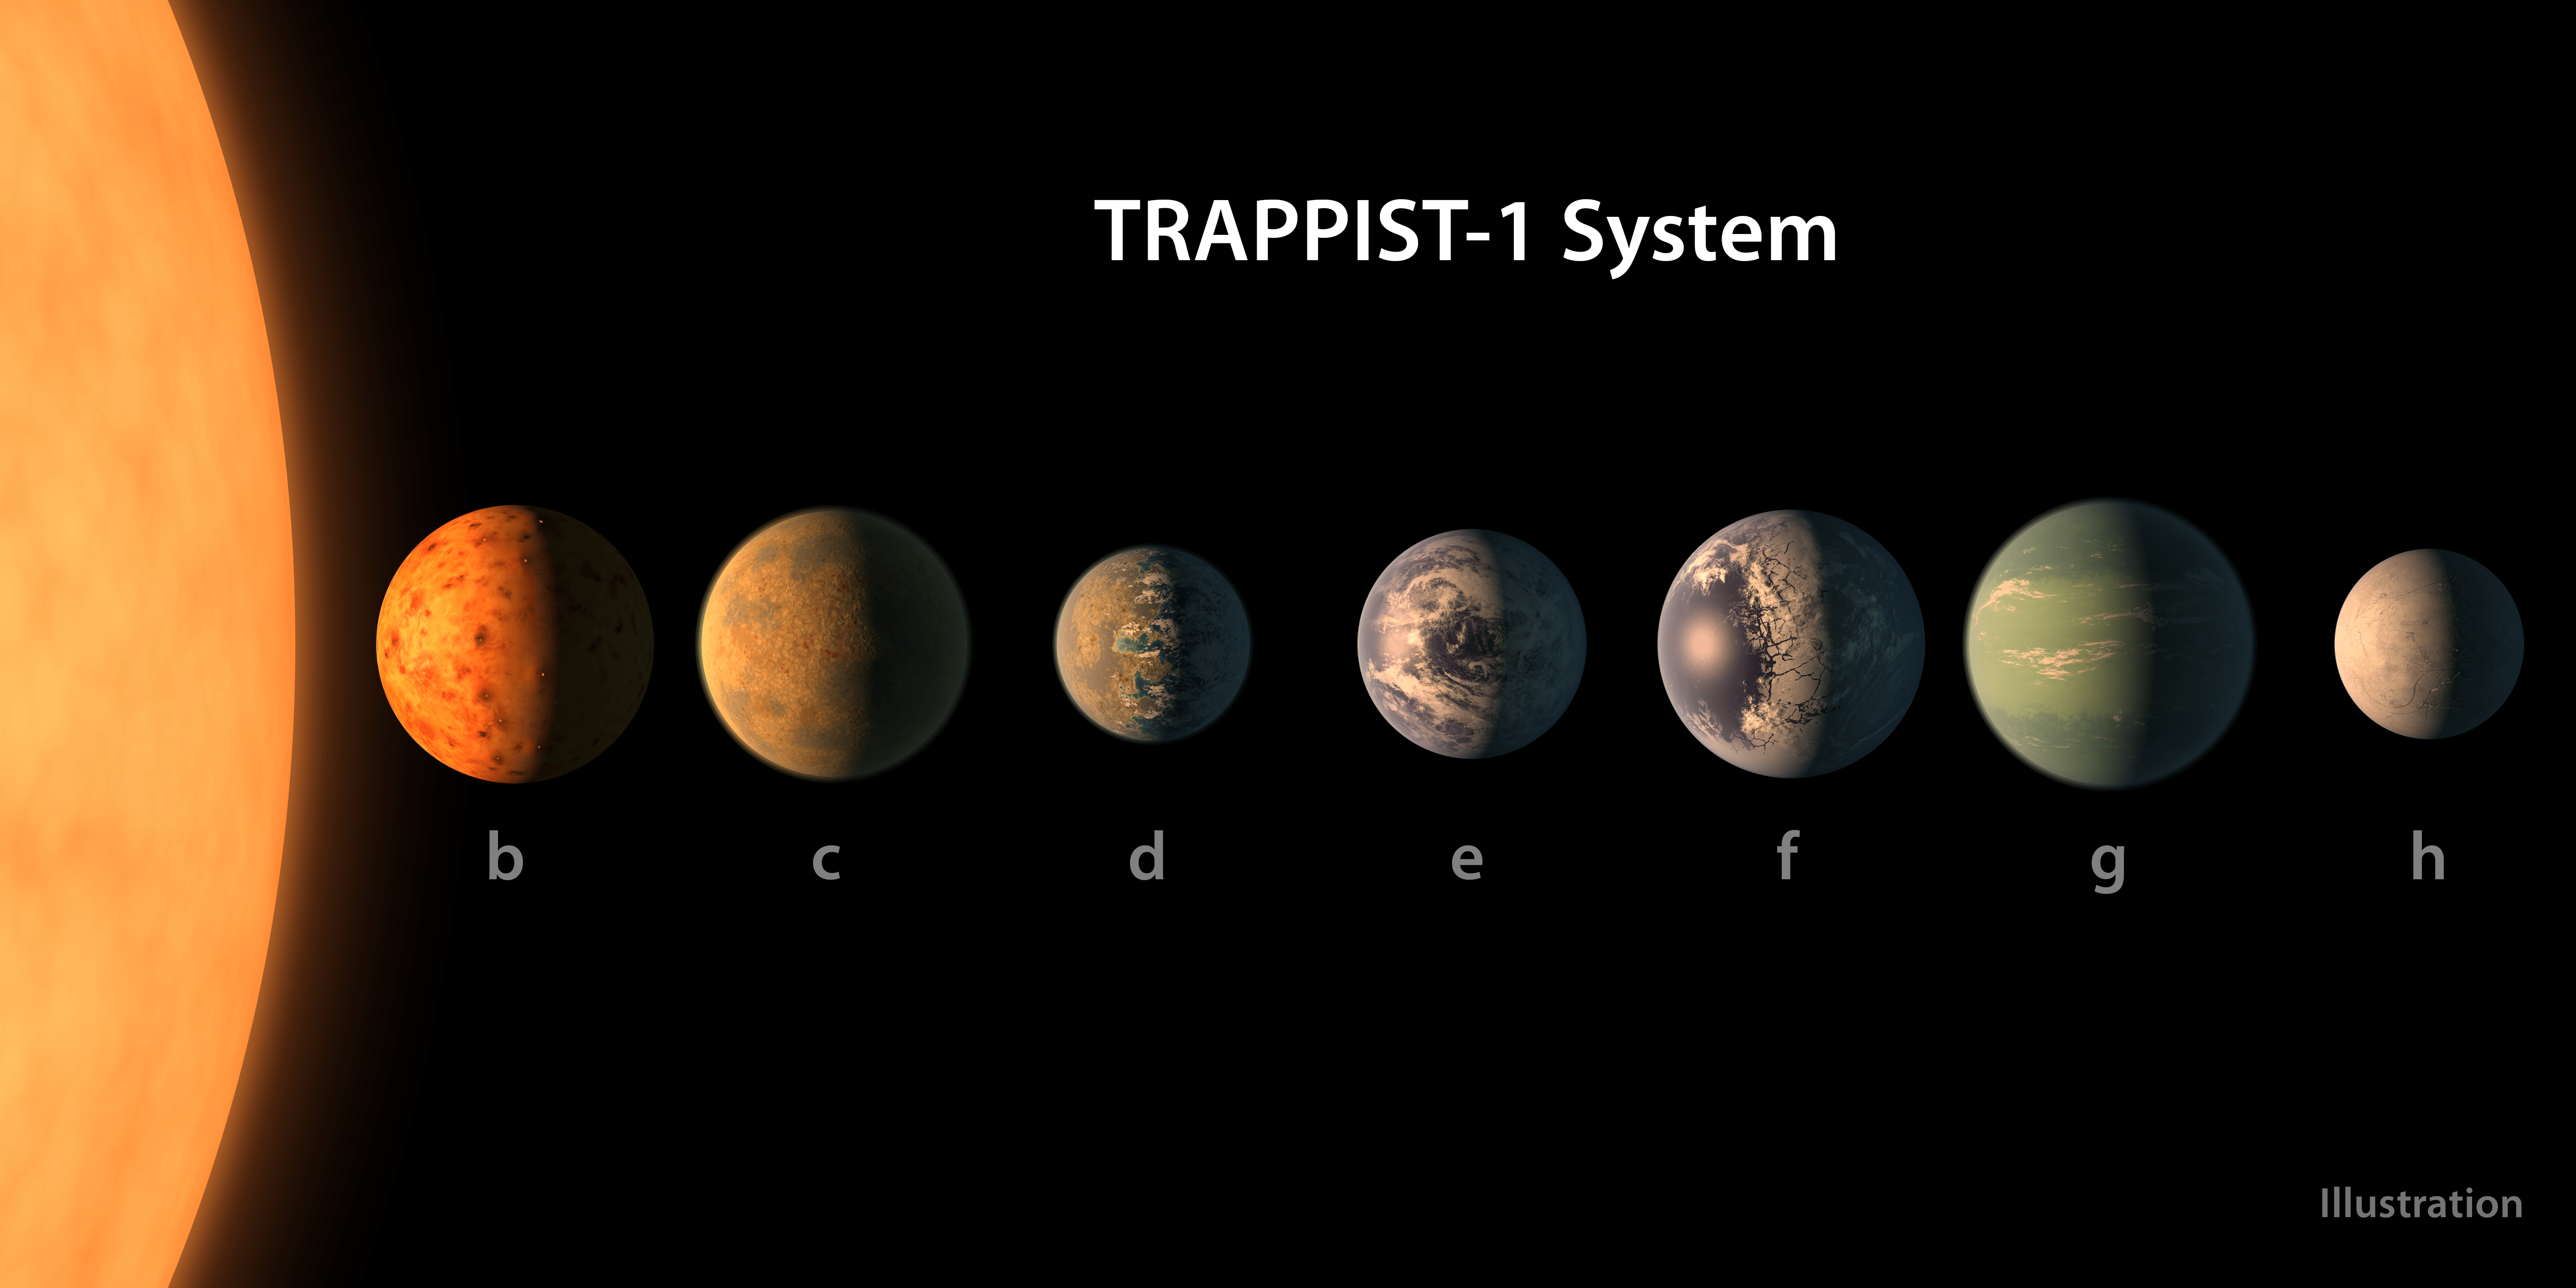 TRAPPIST-1 Star System Contains Two Potentially Habitable Planets, New Study Suggests